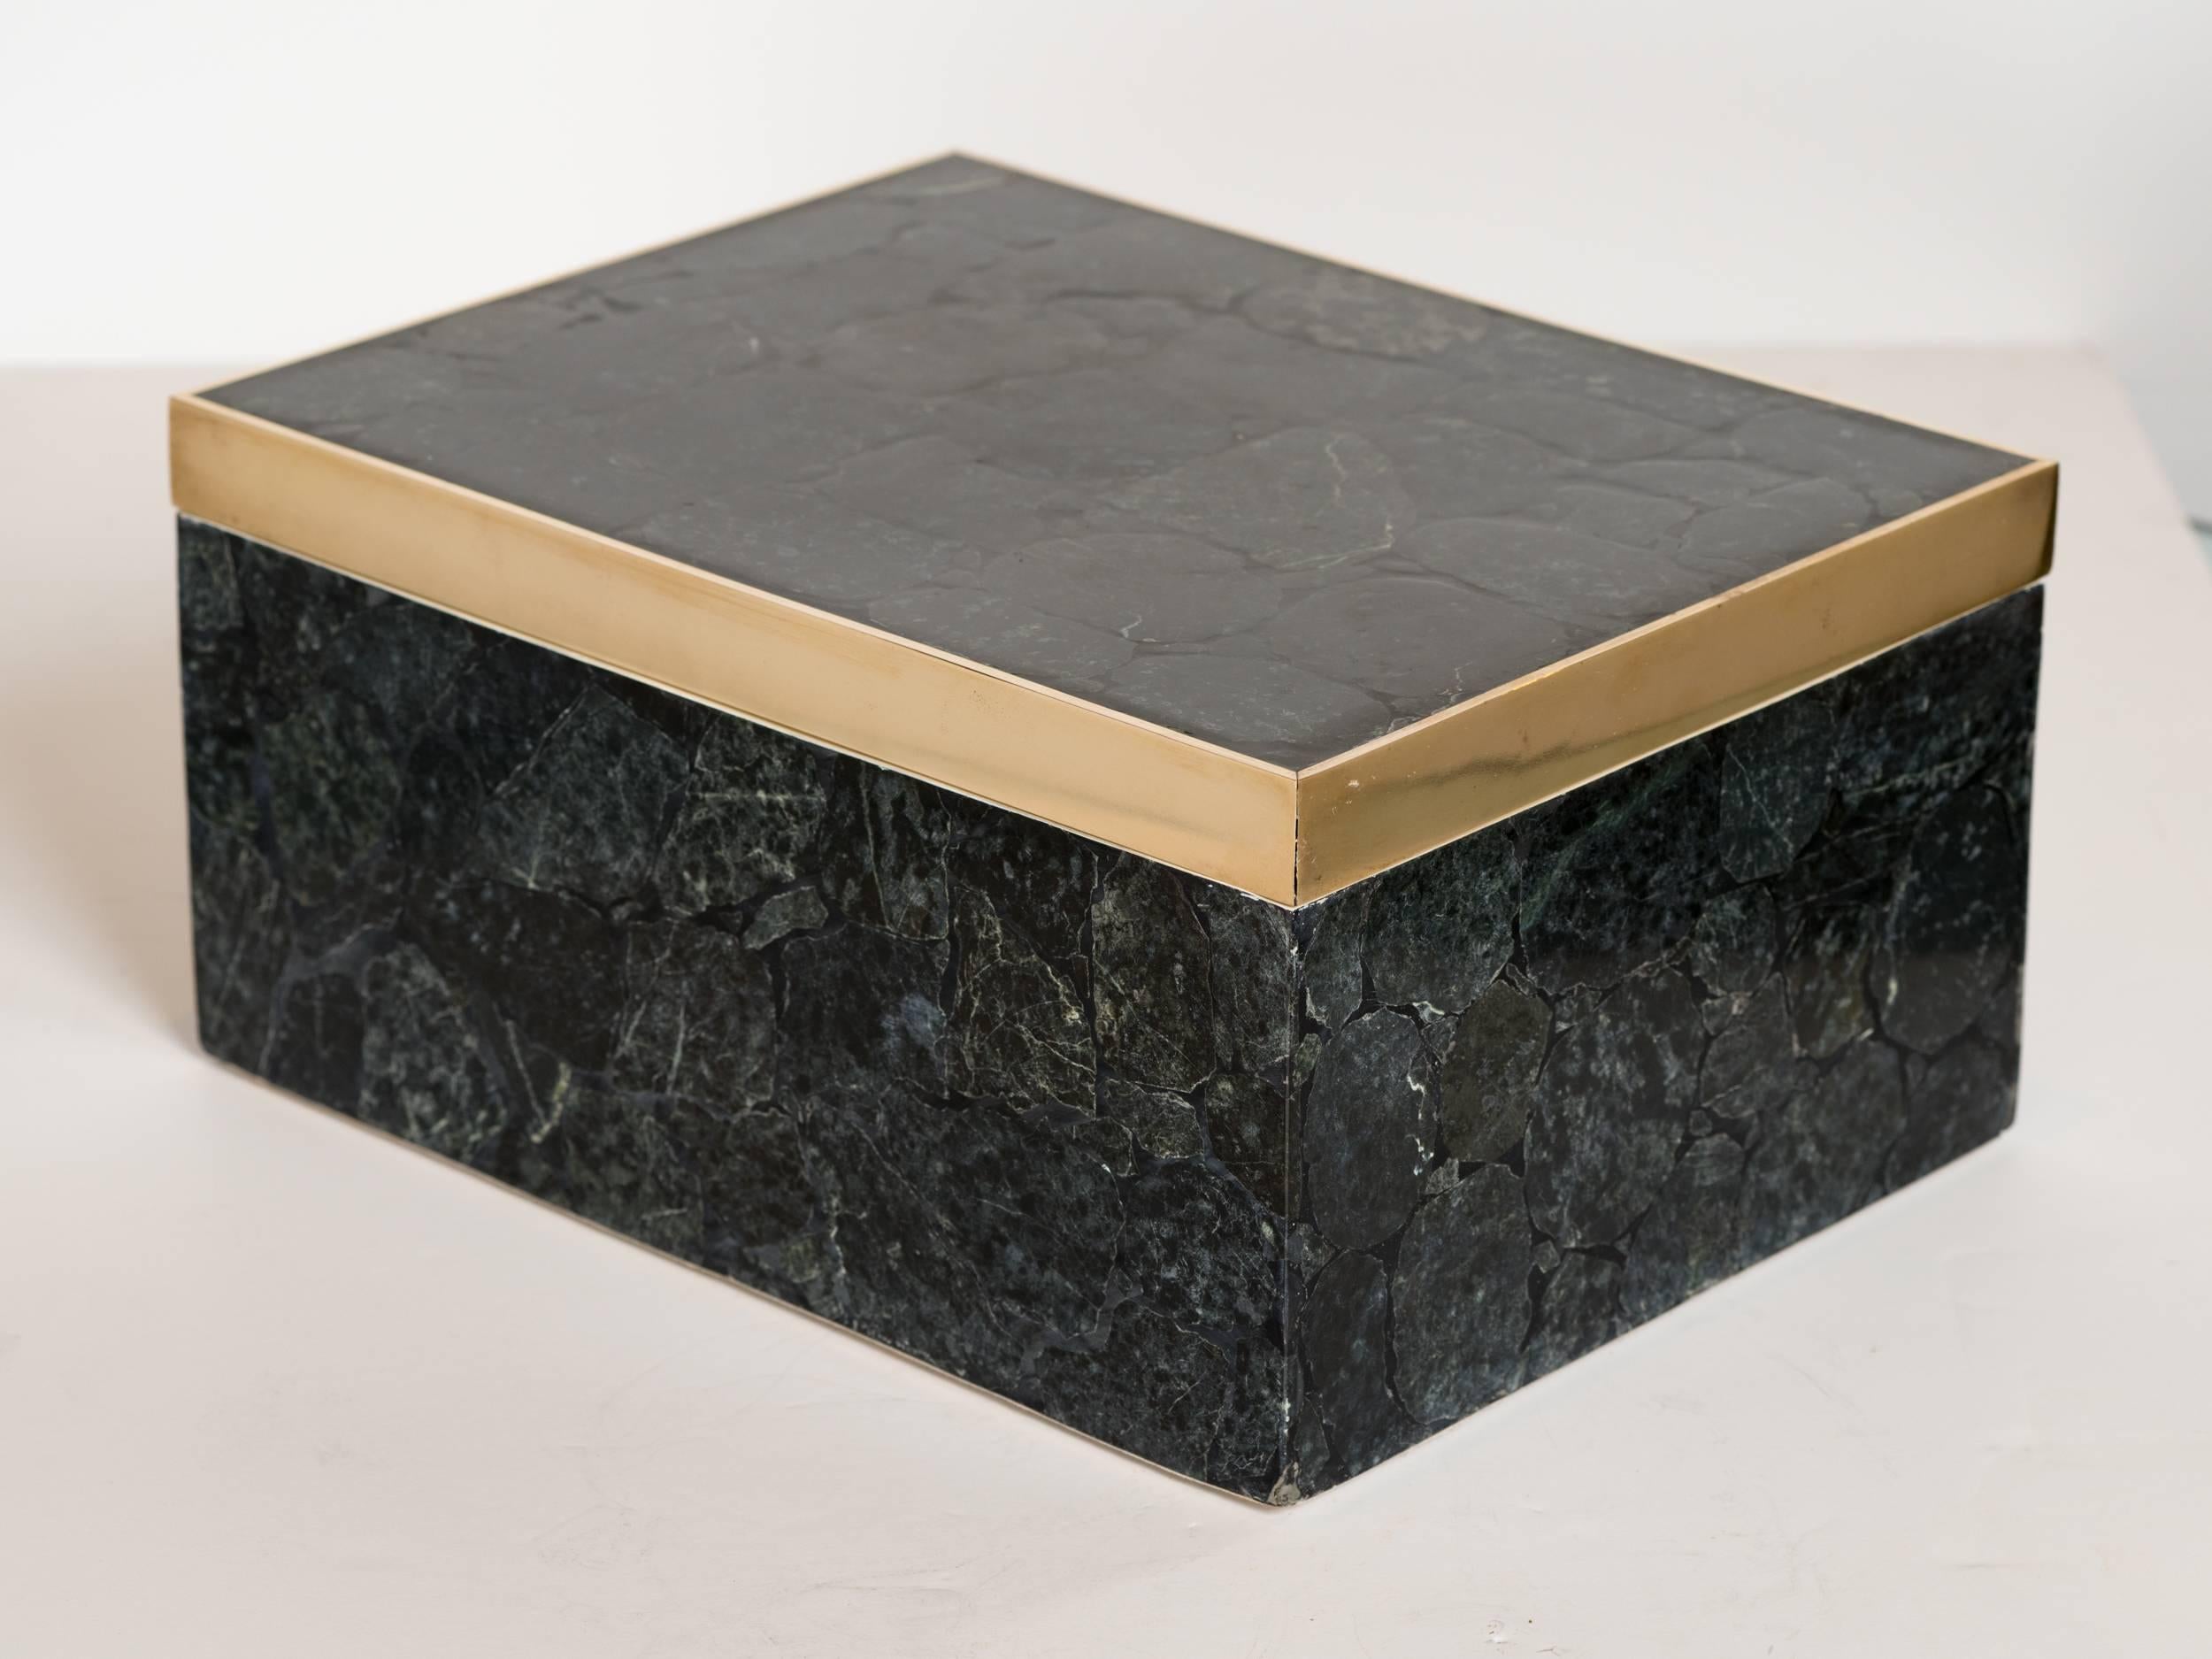 Handsome handcrafted decorative box comprised of black agate stone. Stones form a mosaic pattern and feature varying hues of black and grey, with white and slight green veining throughout. The lid has a beautiful brass banded detail and the interior